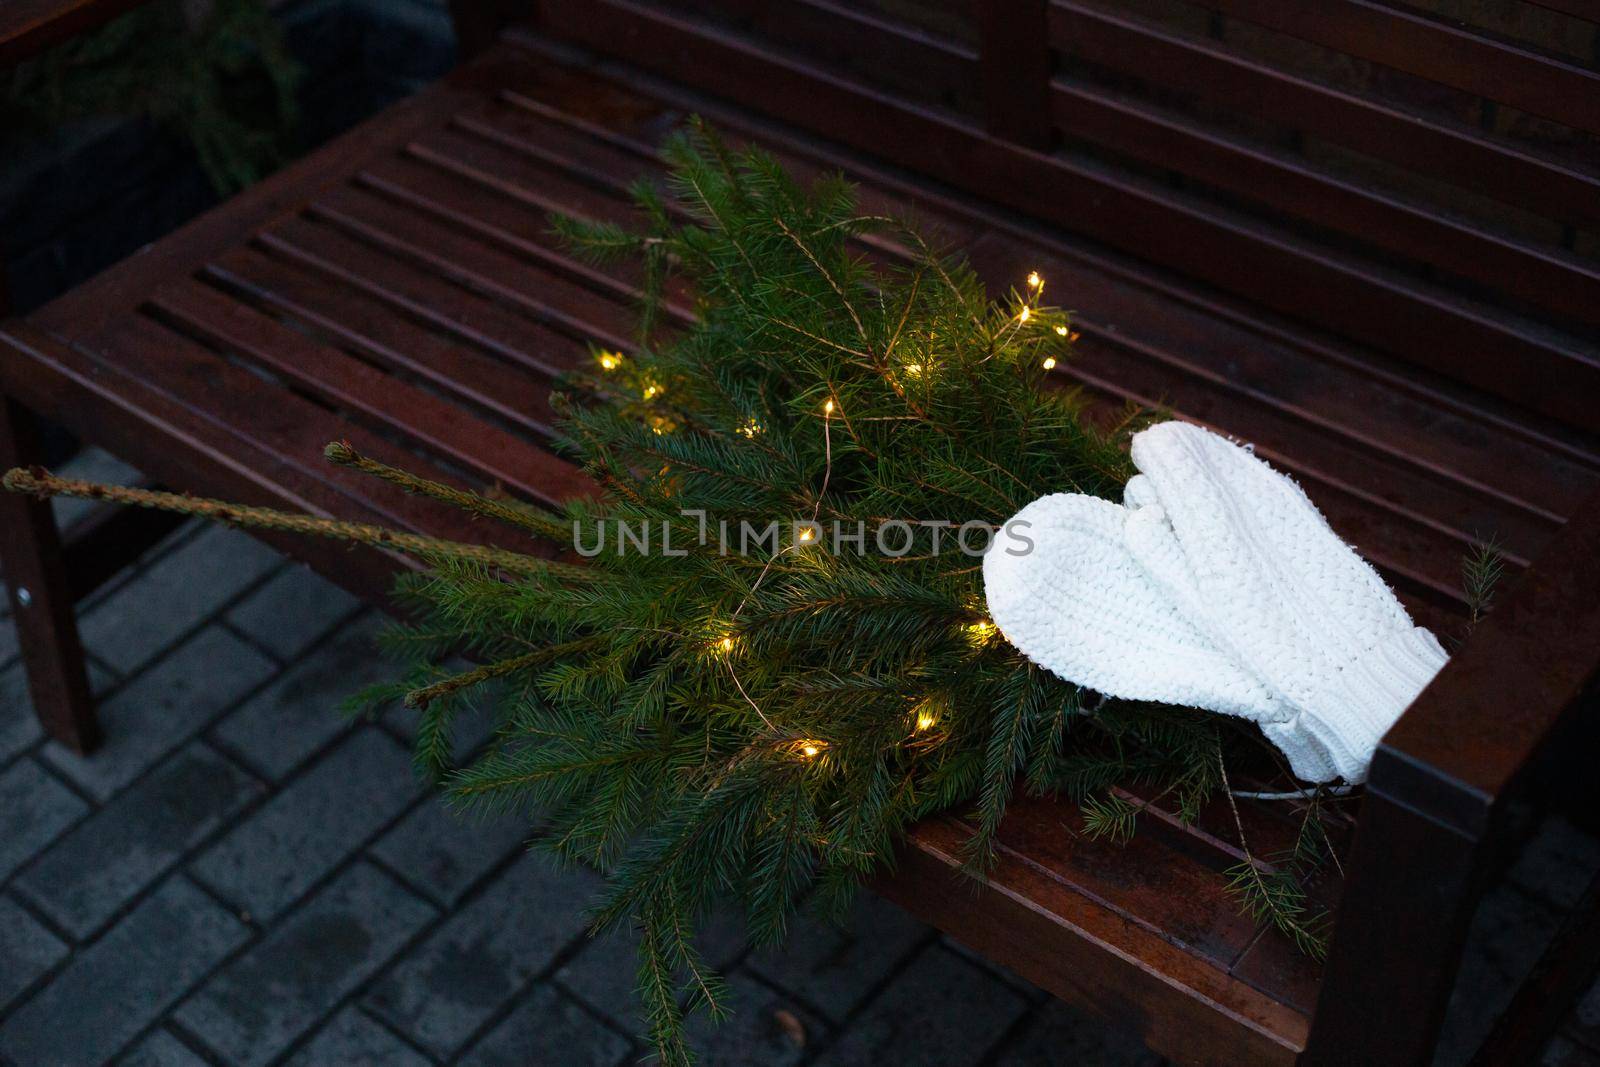 Branches of a coniferous tree decorated with a garland lie on a bench along with knitted white mittens